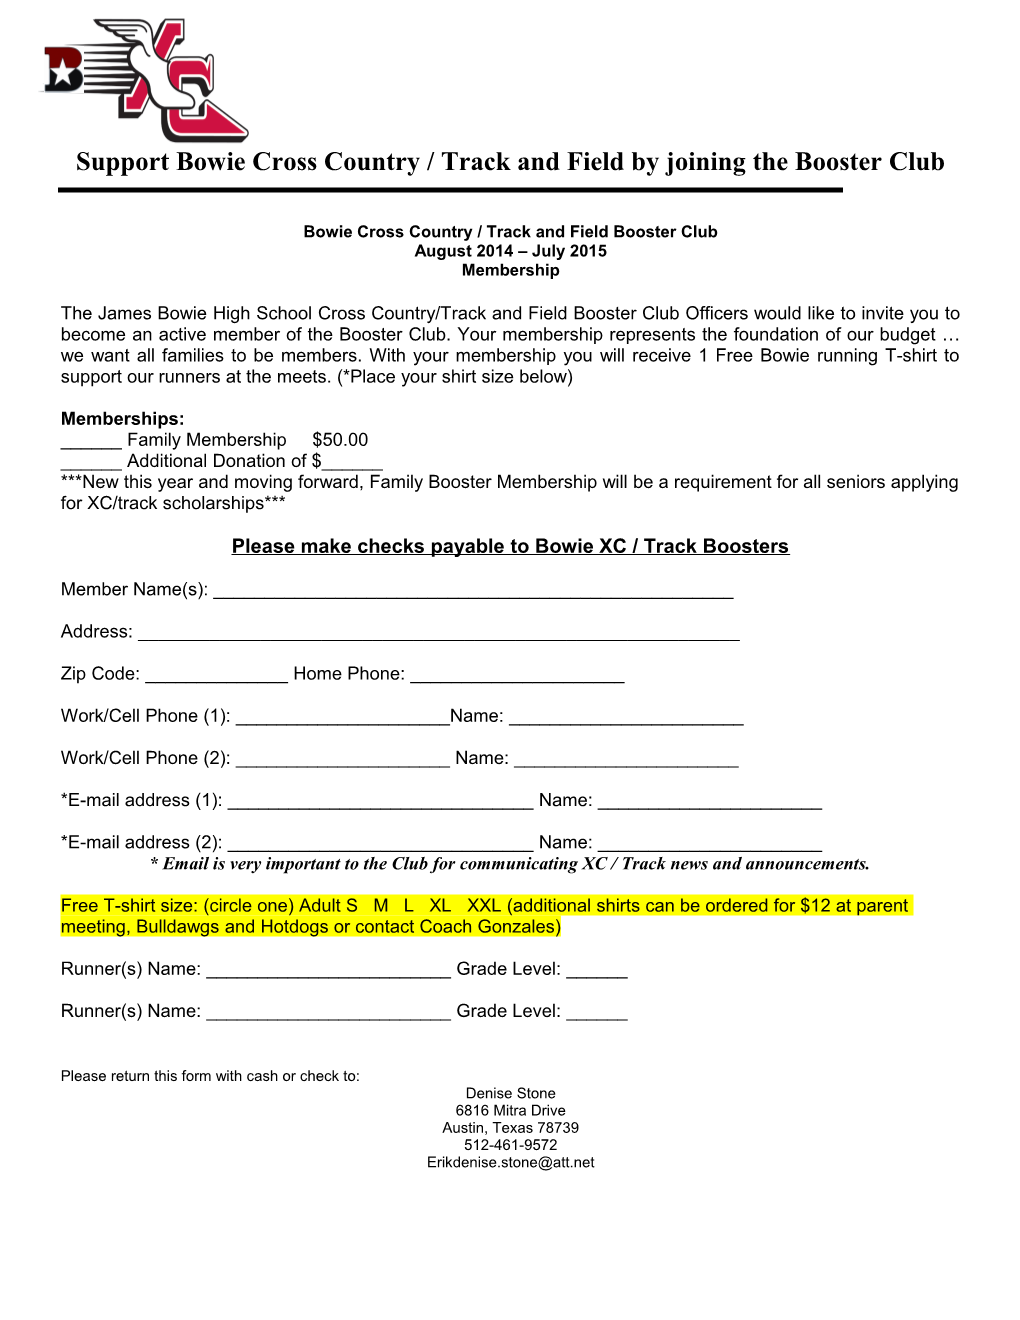 The James Bowie High School Cross Country Booster Club Officers Would Like to Invite You